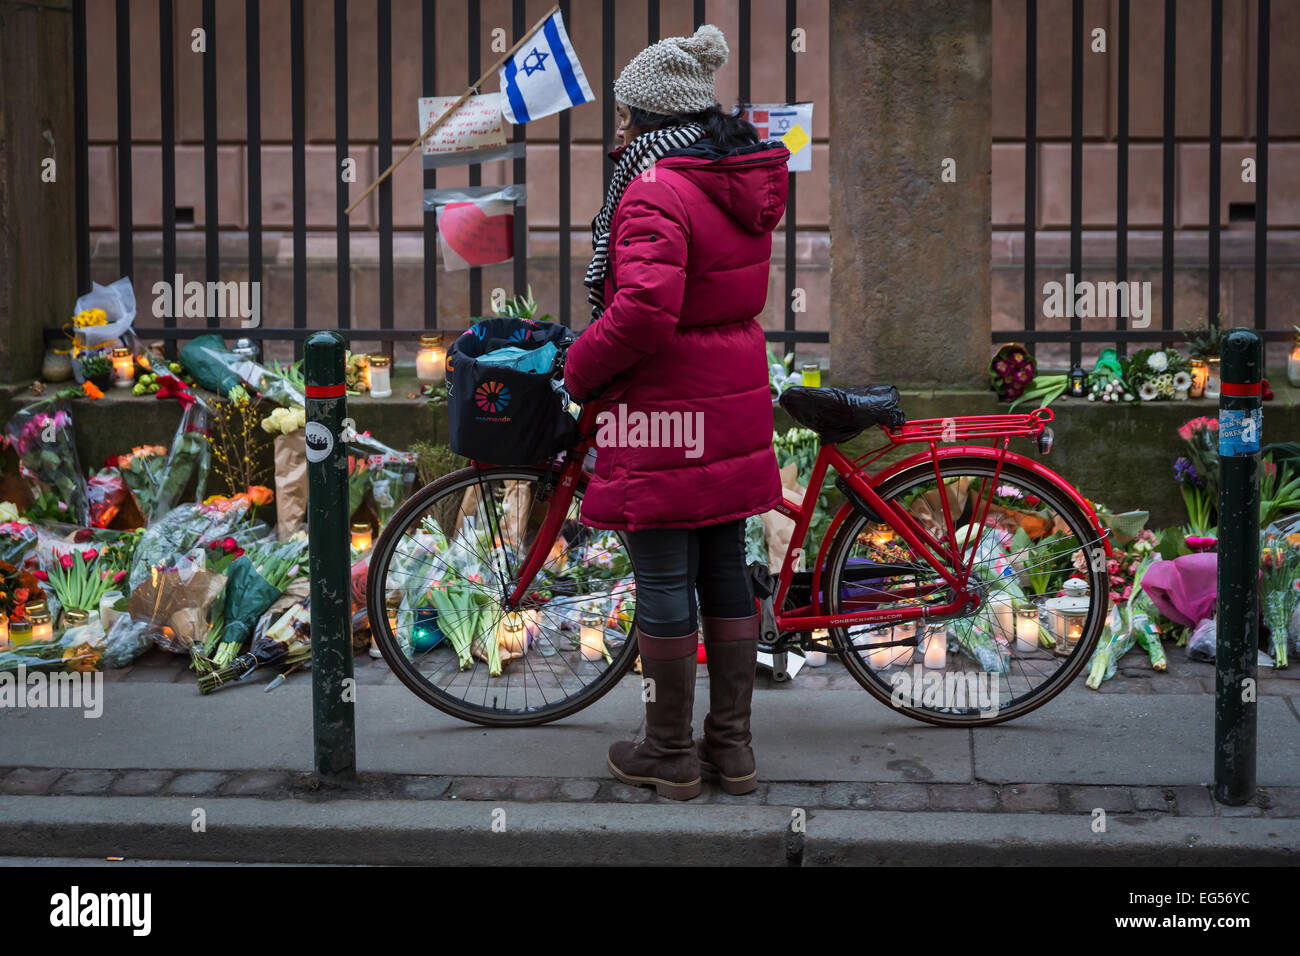 A woman watching the flowers at Copenhagen's main synagogue where a man was killed during a terrorist attack on 15 February 2015 Stock Photo